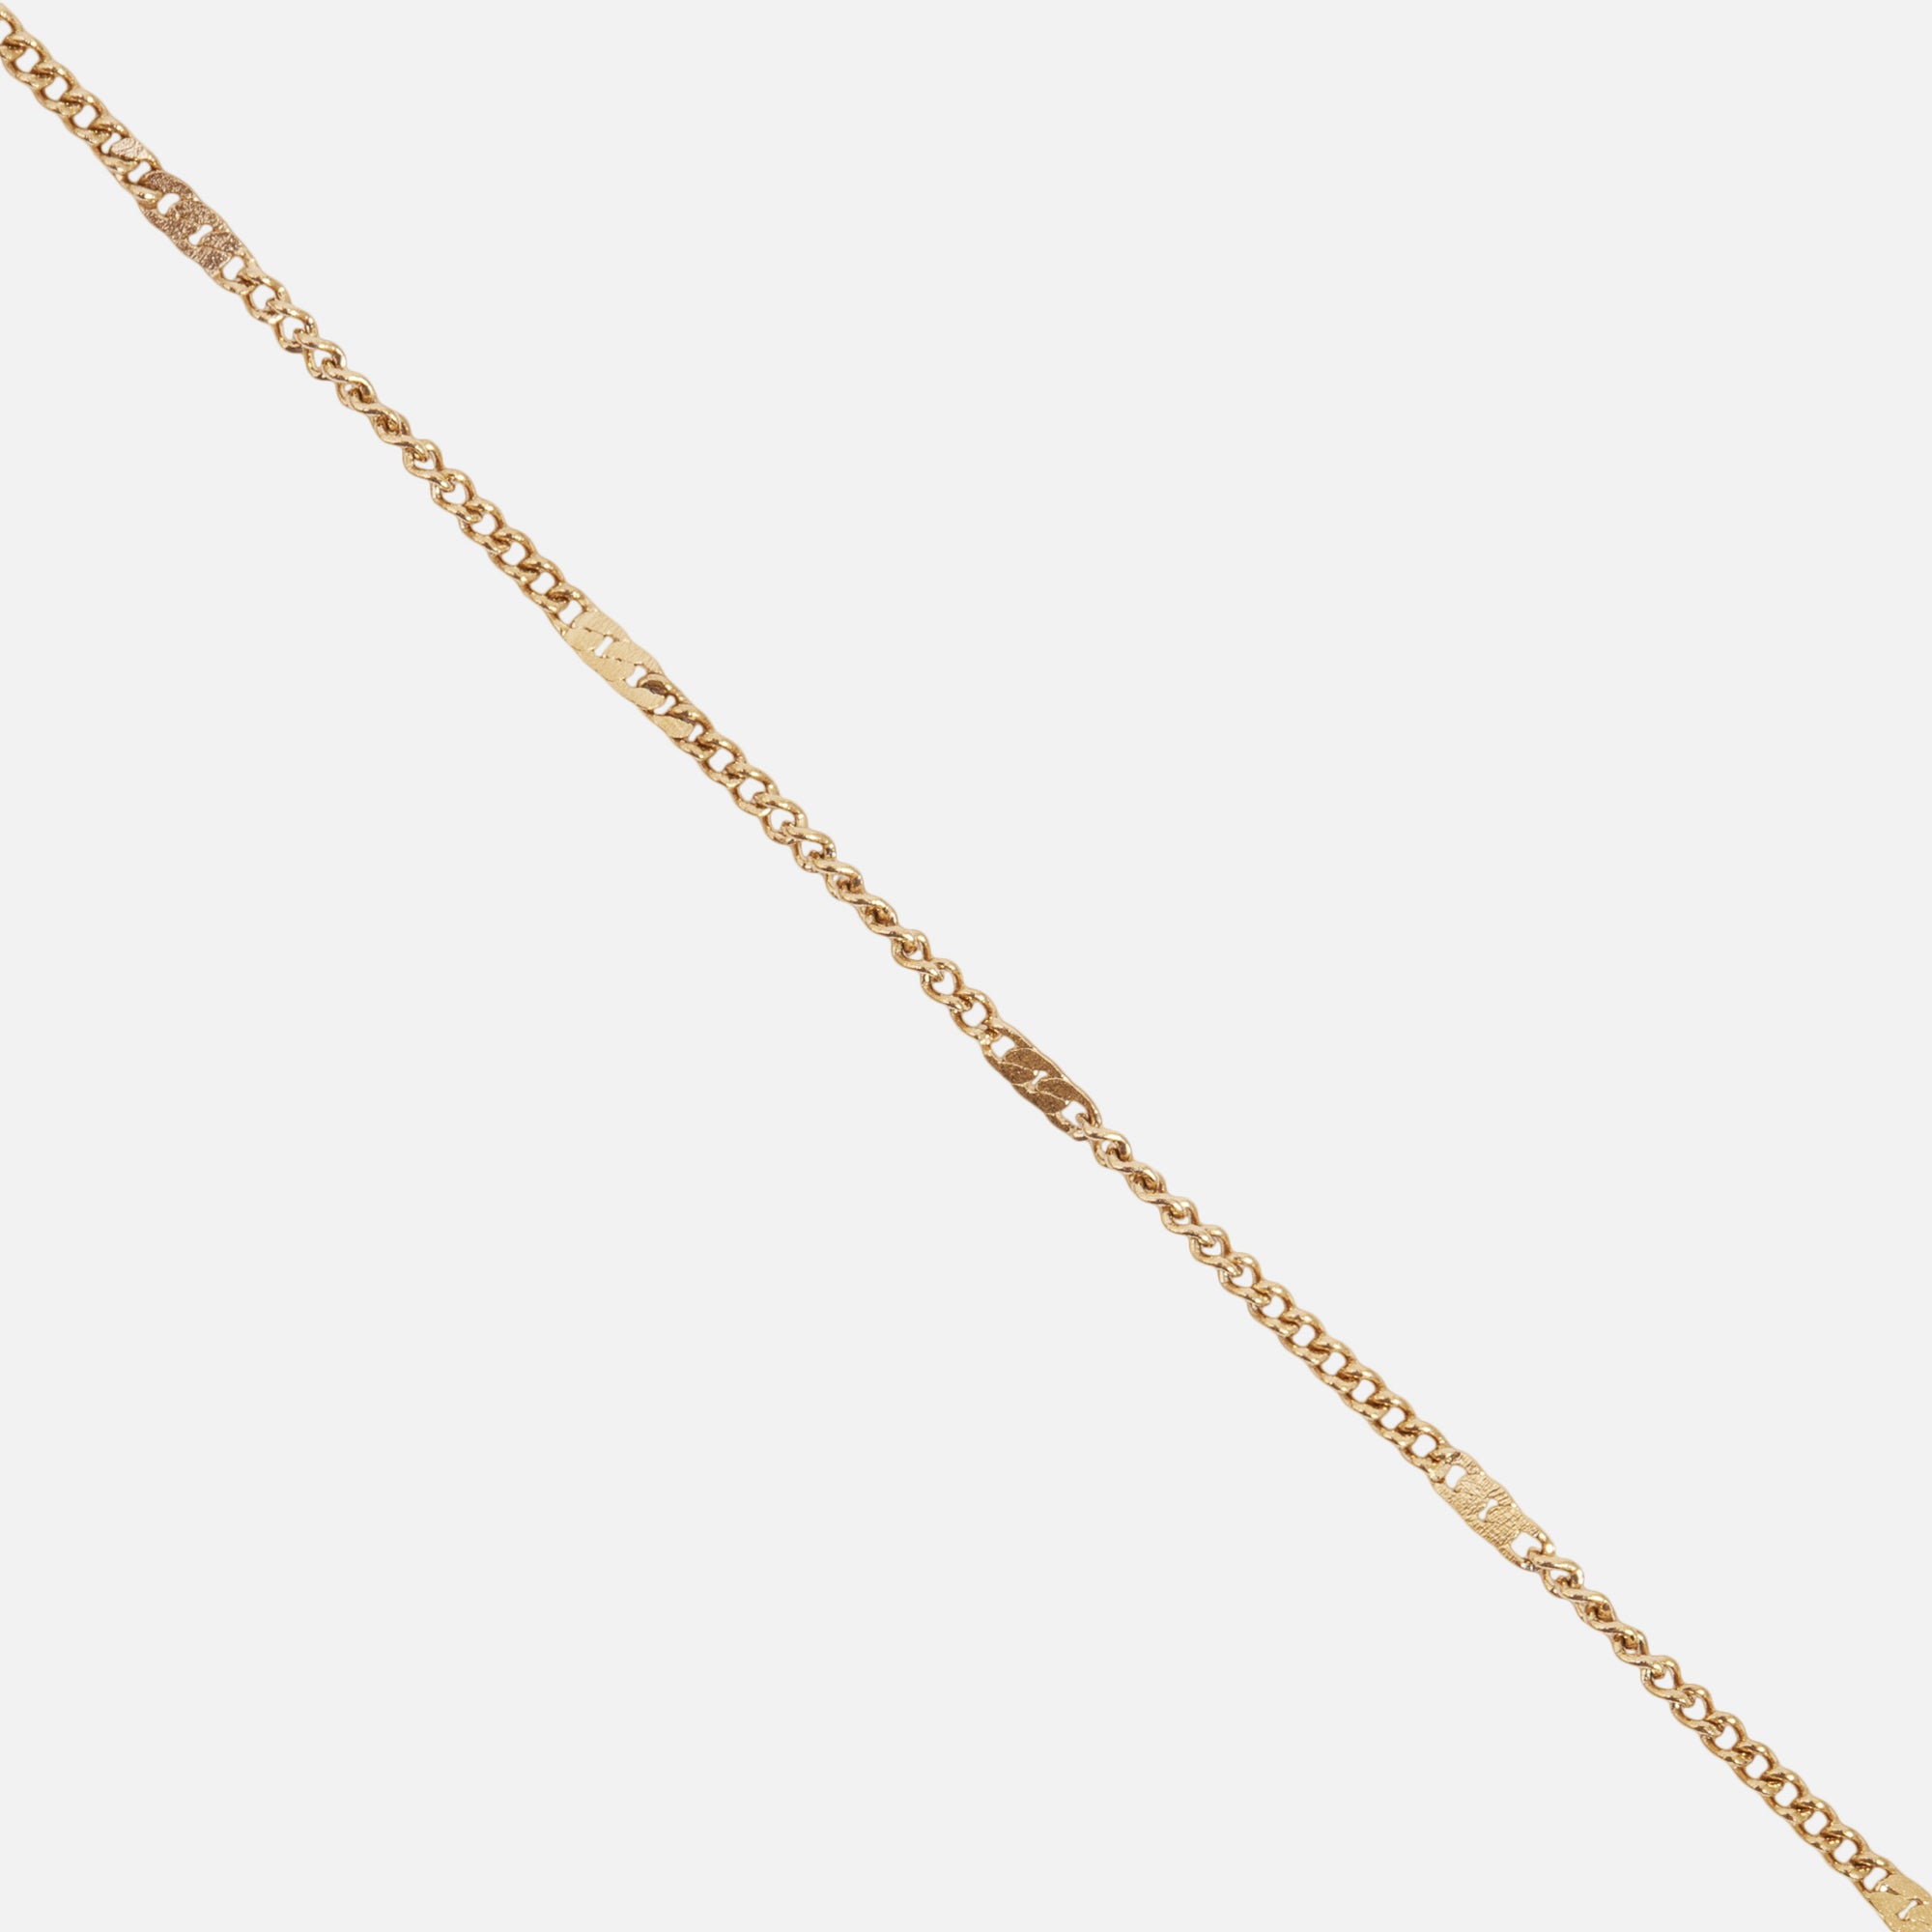 Stainless steel golden bracelet with flat inserts